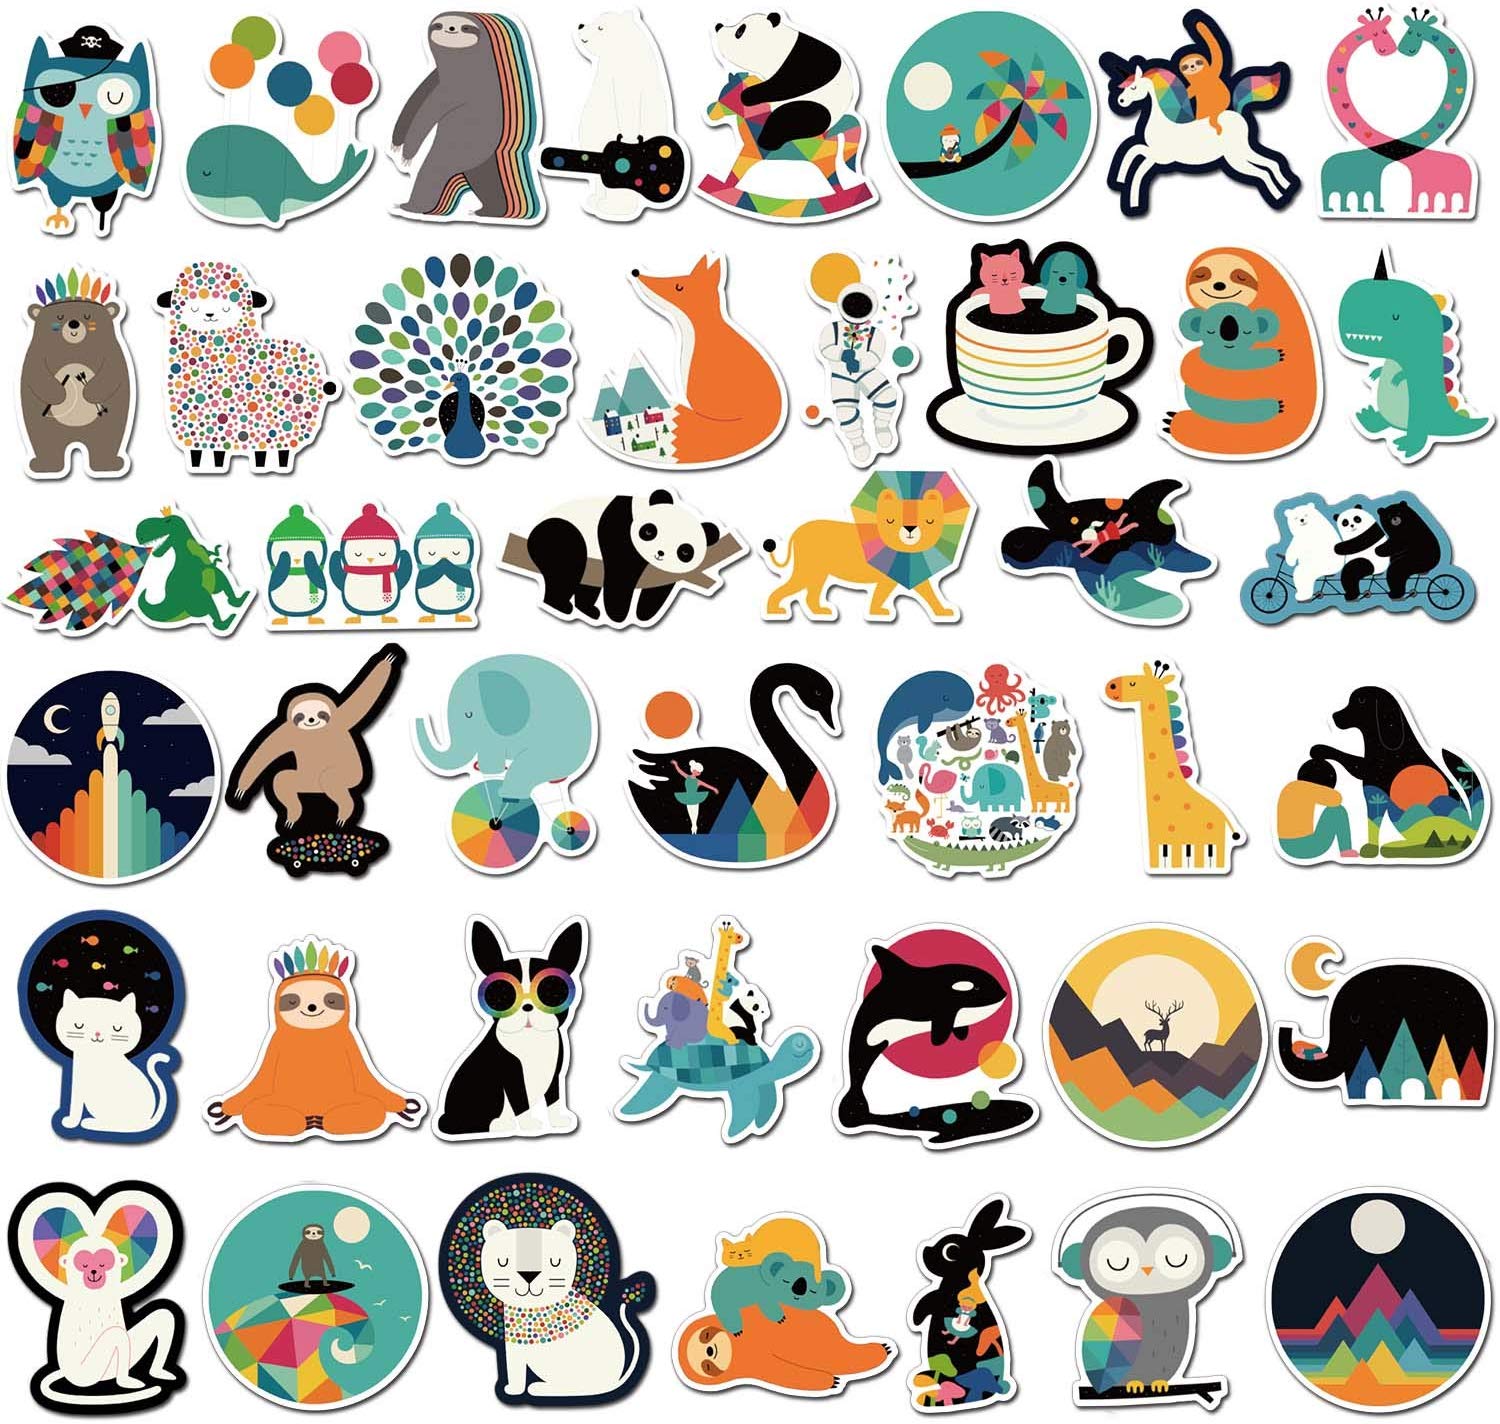 This sticker collection includes 100 trendy animal vinyl stickers to person...